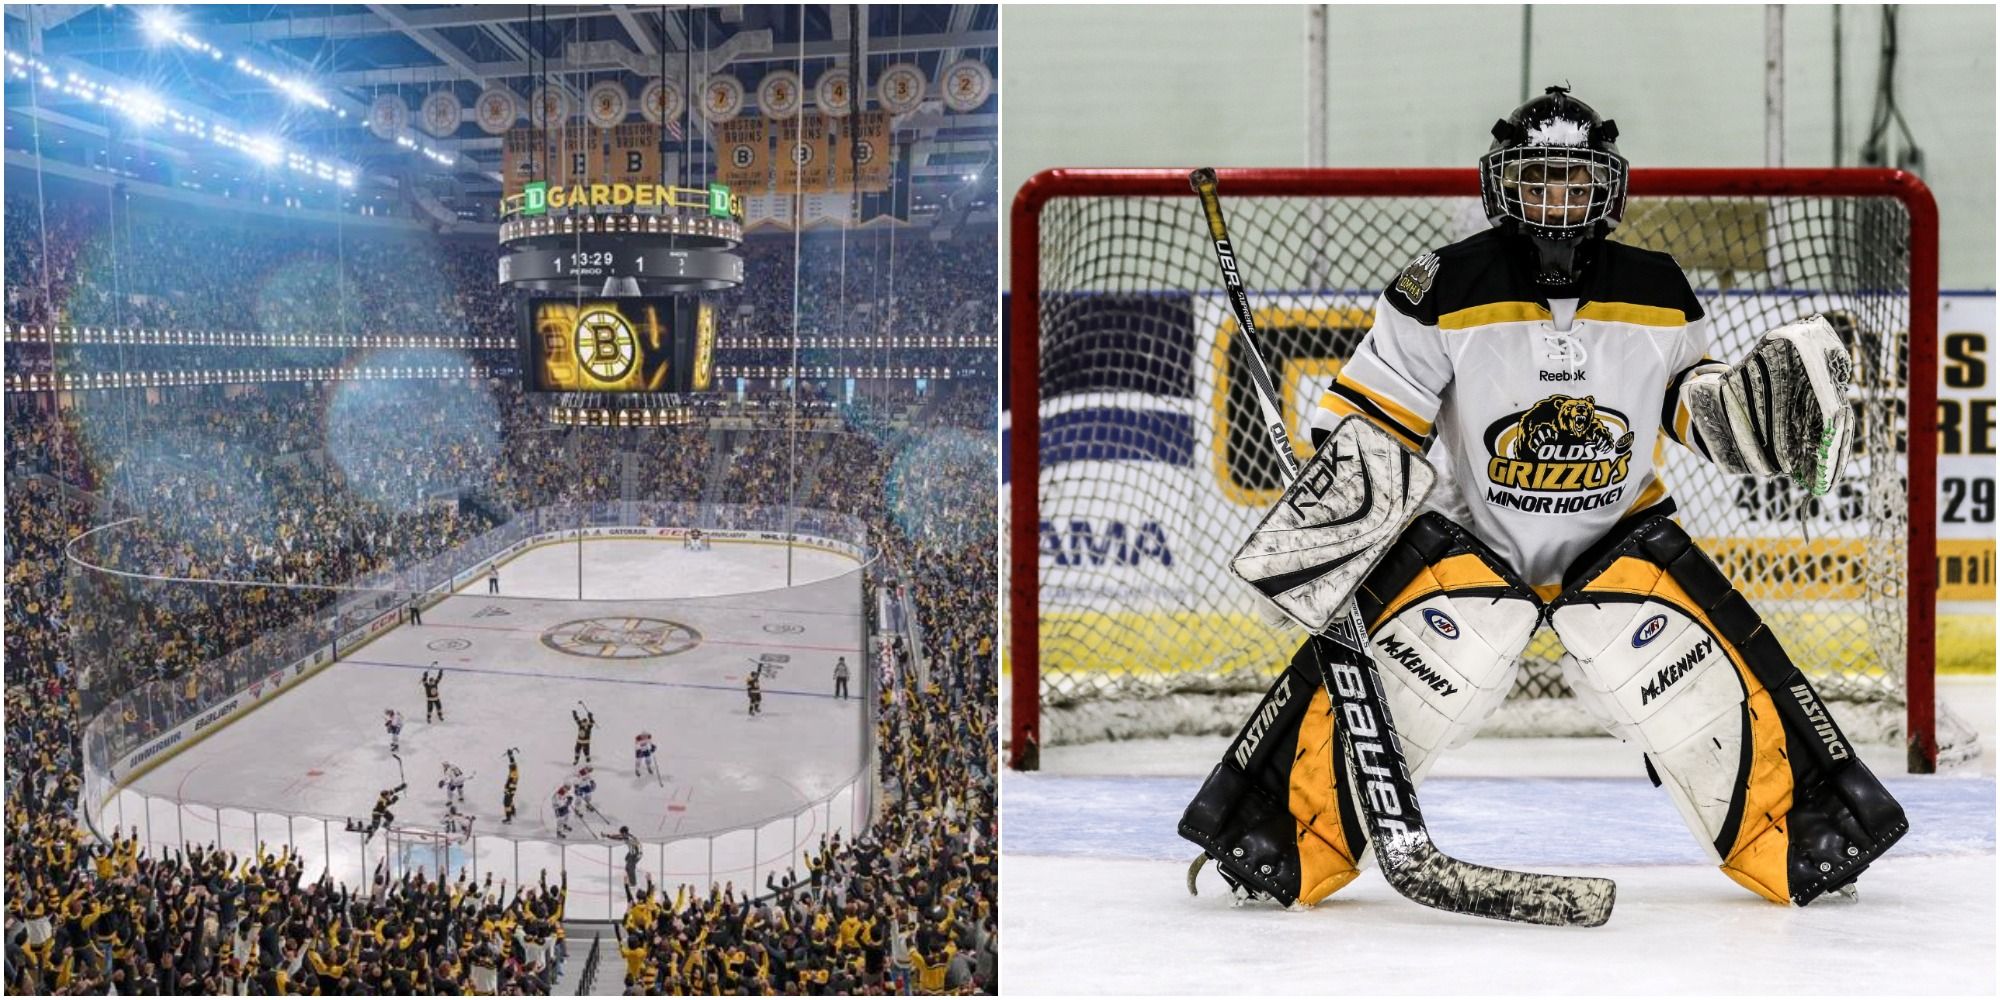 NHL 22 Split image in game screenshot and real image 